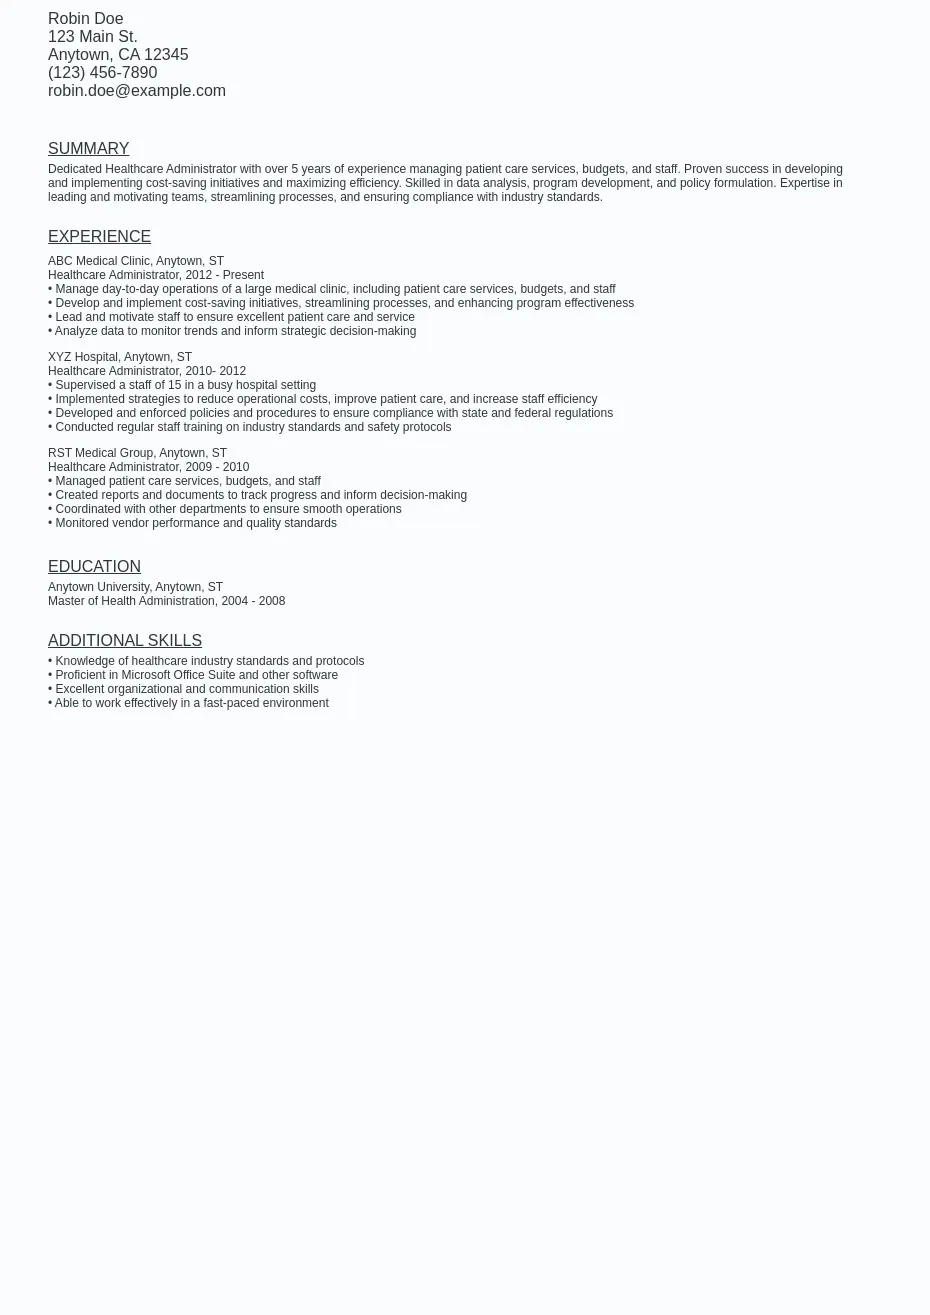 Sample resume template for Healthcare Administrator, showcasing a clean and professional layout with sections for personal details, experience, education, and skills.